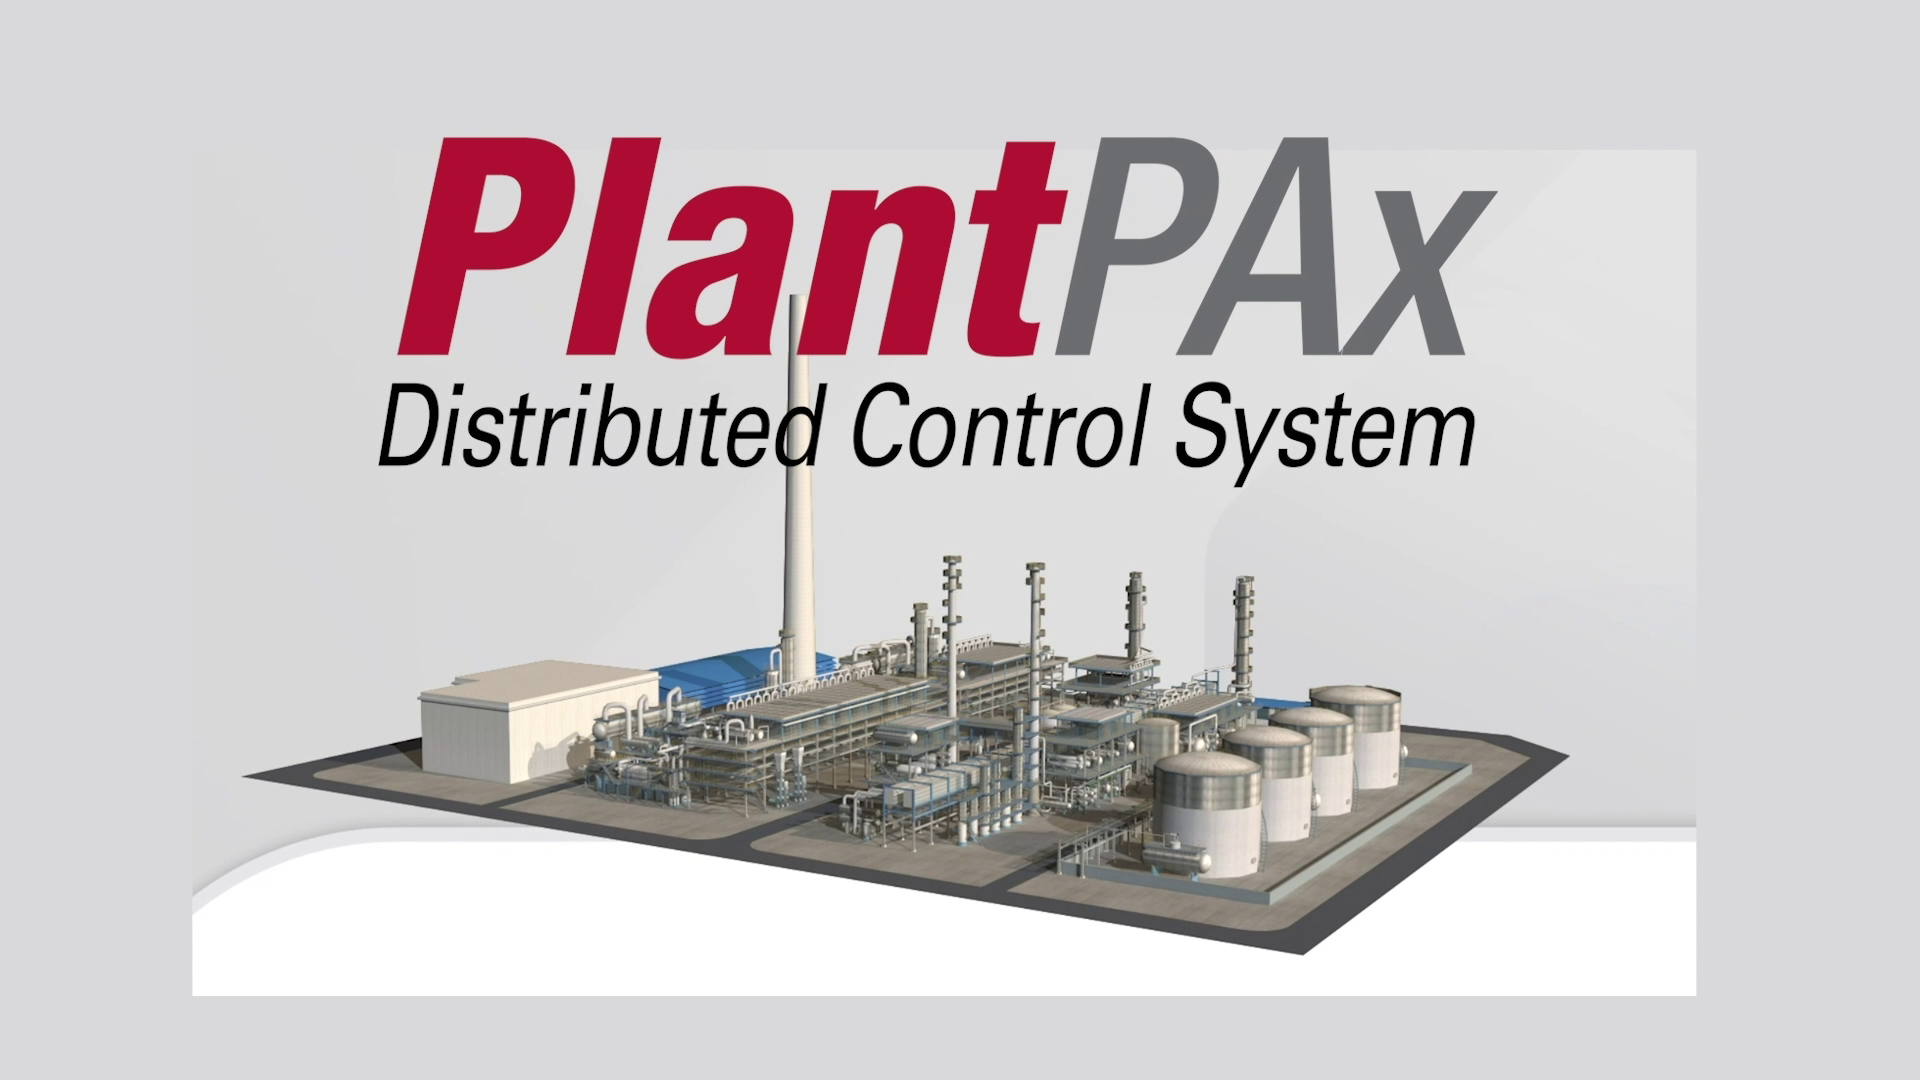 PlantPAx Distributed Control System | Rockwell Automation